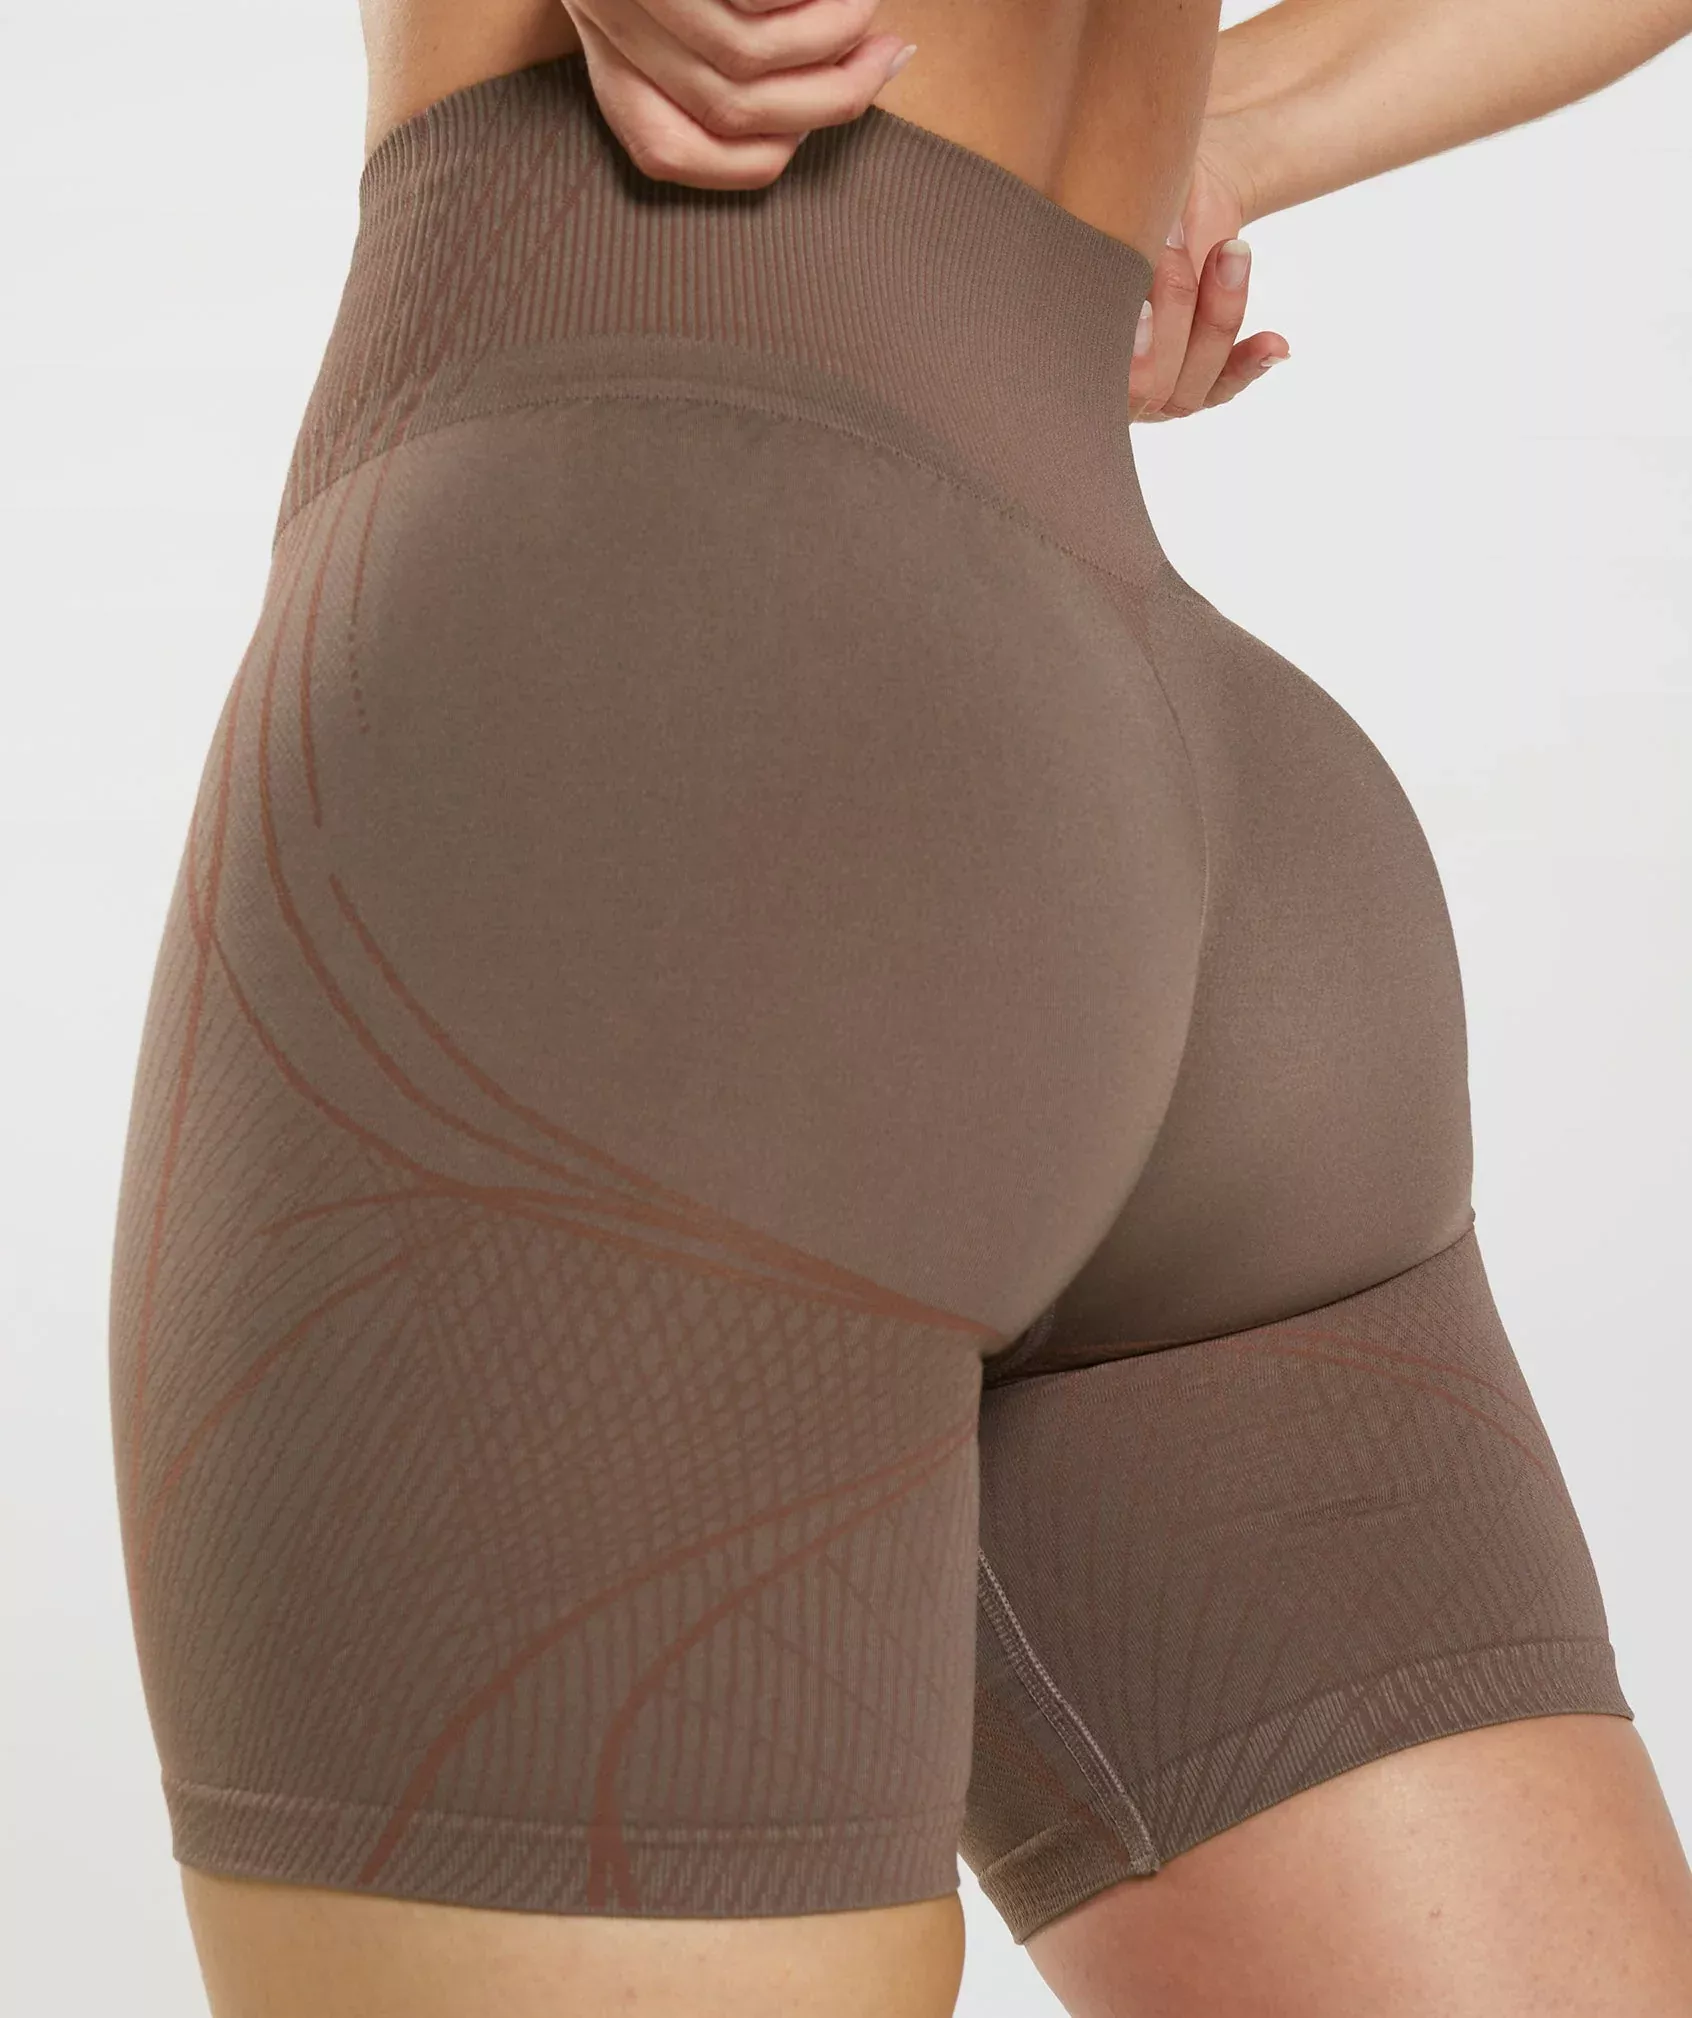 Apex Seamless Low Rise Shorts